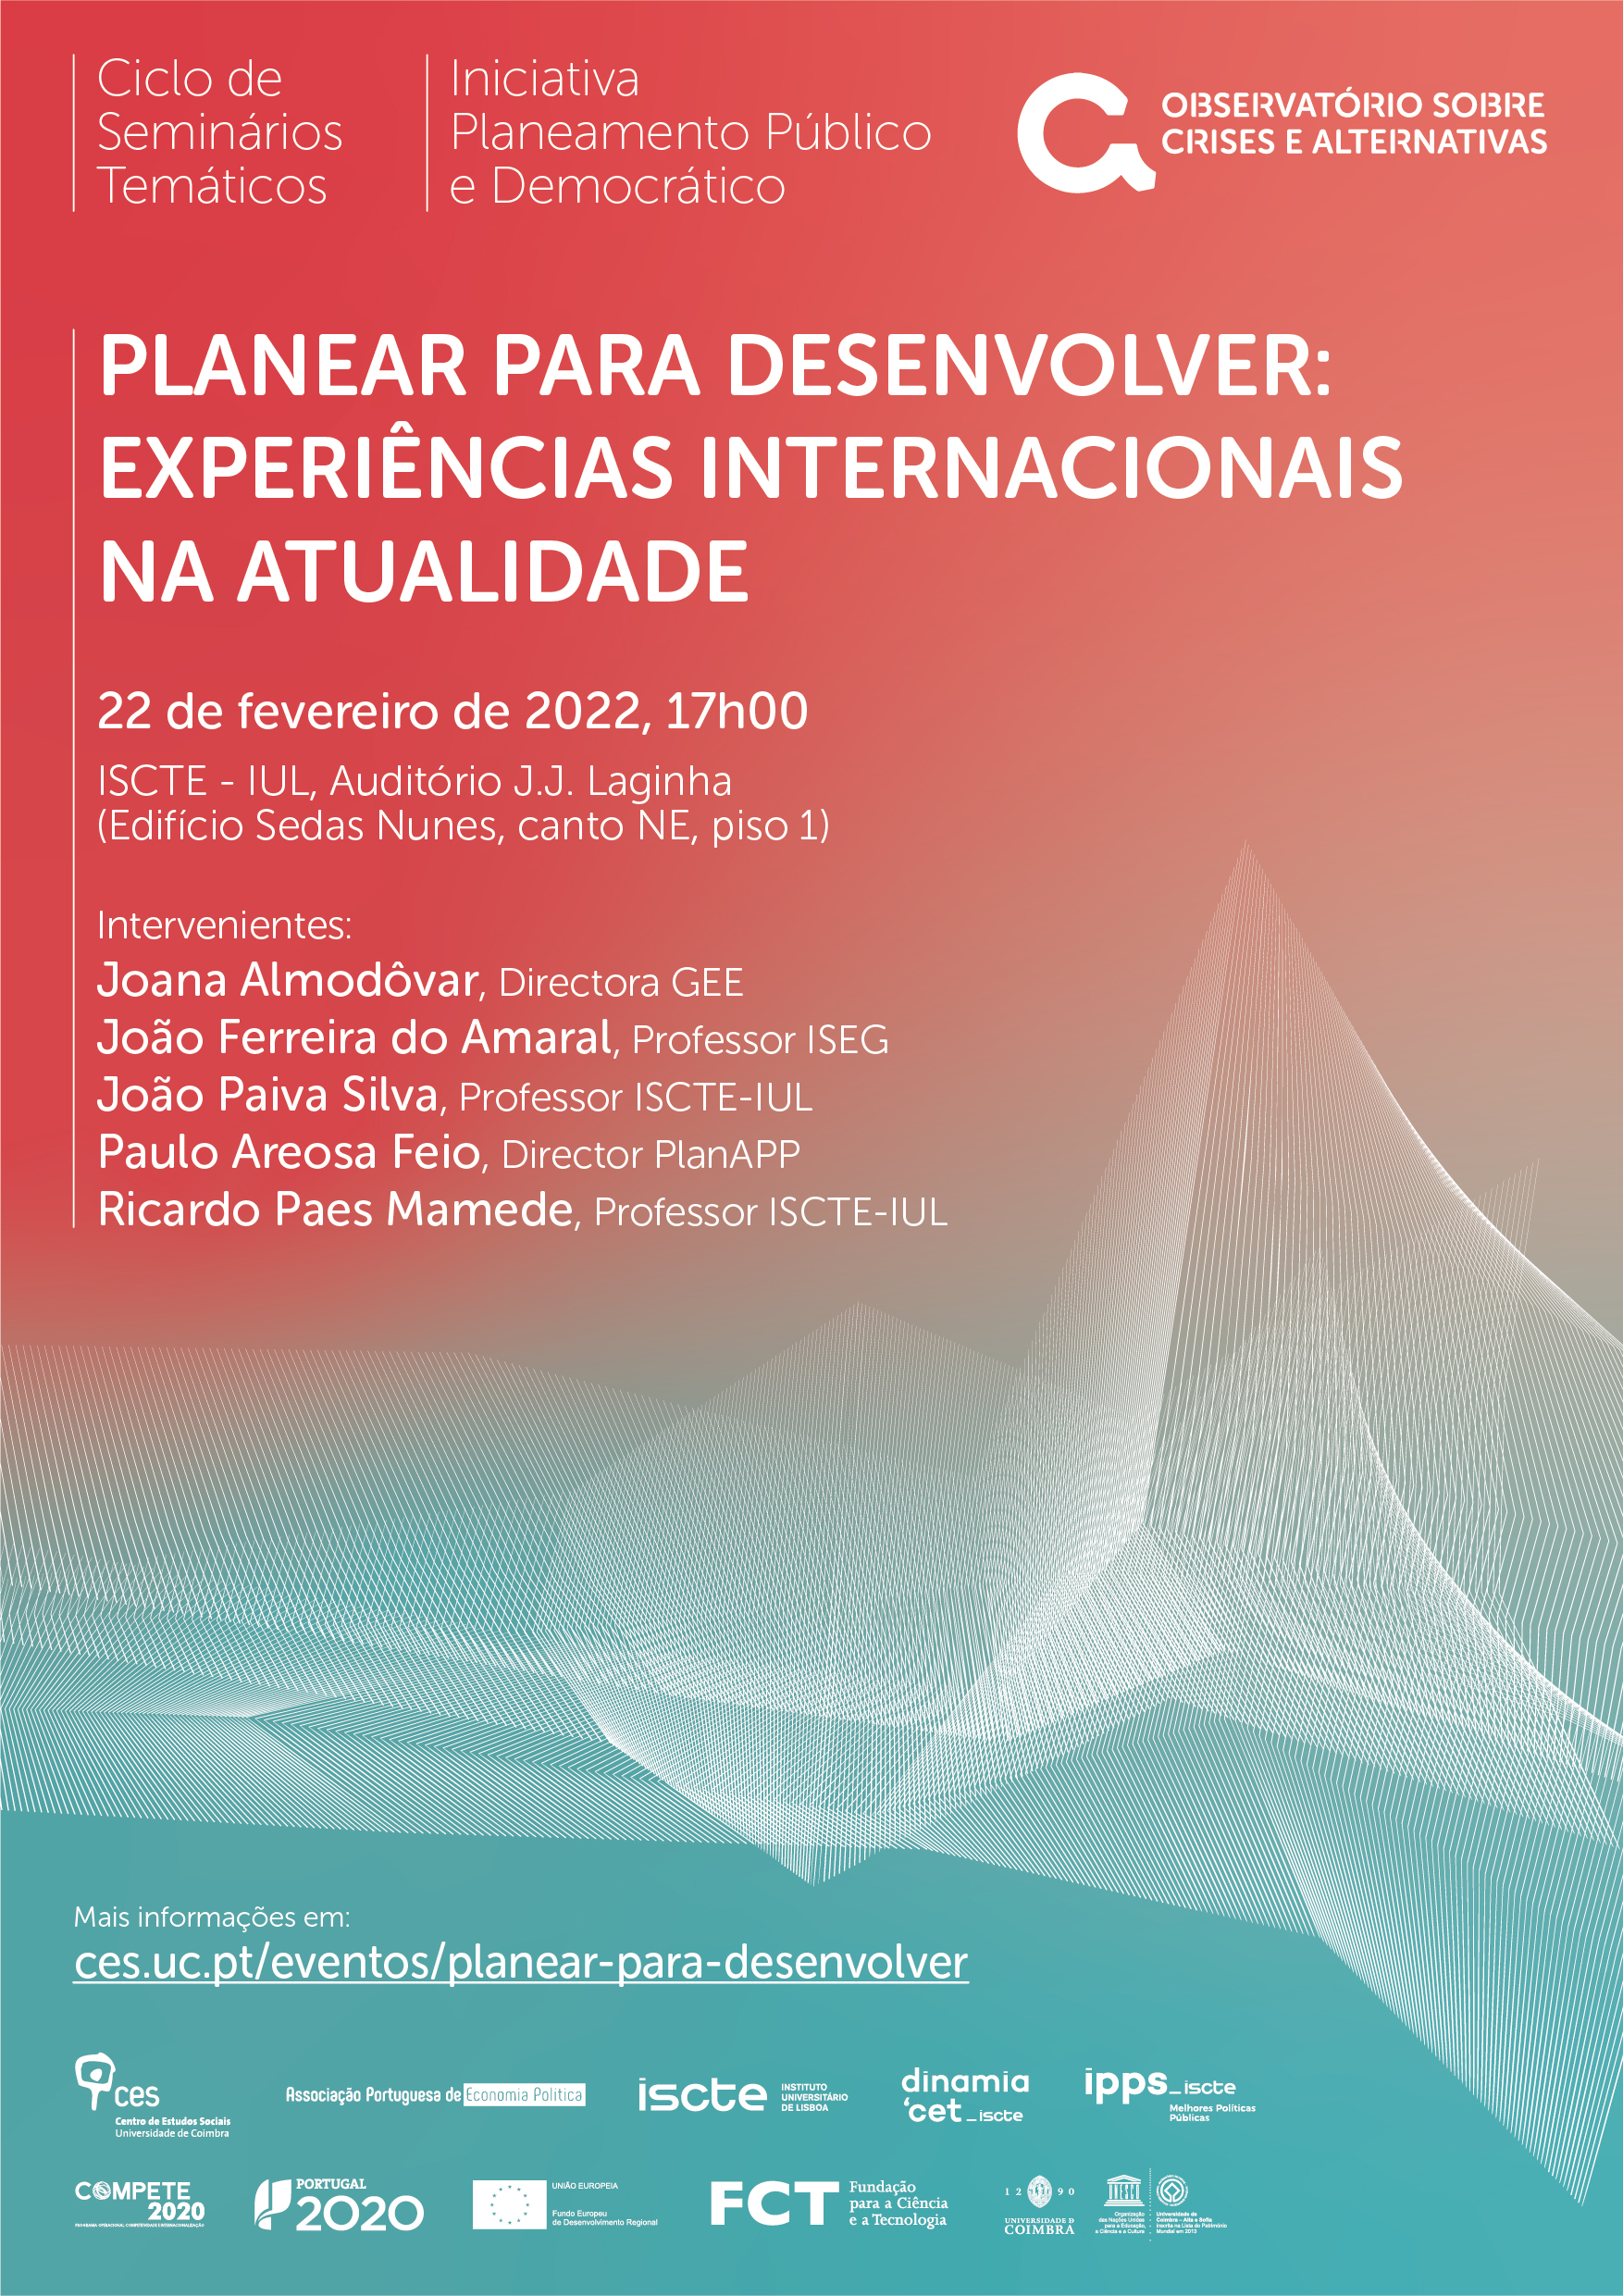 Planning to develop: current international experiences<span id="edit_37476"><script>$(function() { $('#edit_37476').load( "/myces/user/editobj.php?tipo=evento&id=37476" ); });</script></span>